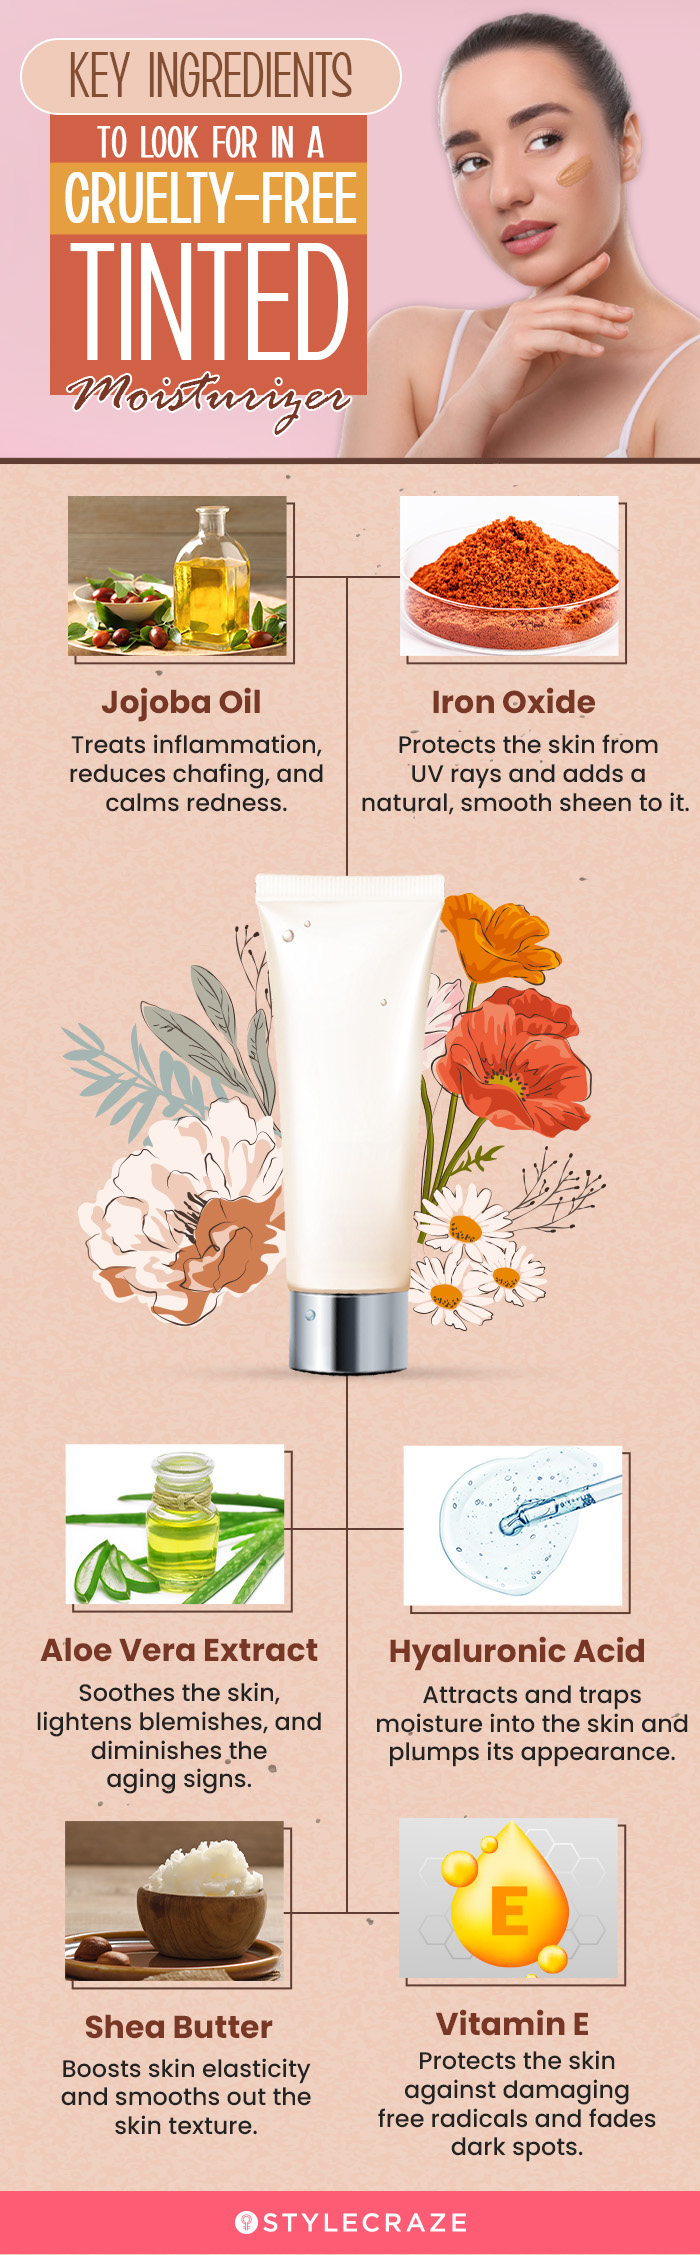 Key Ingredients To Look For In A Cruelty-Free Tinted Moisturizer (infographic)